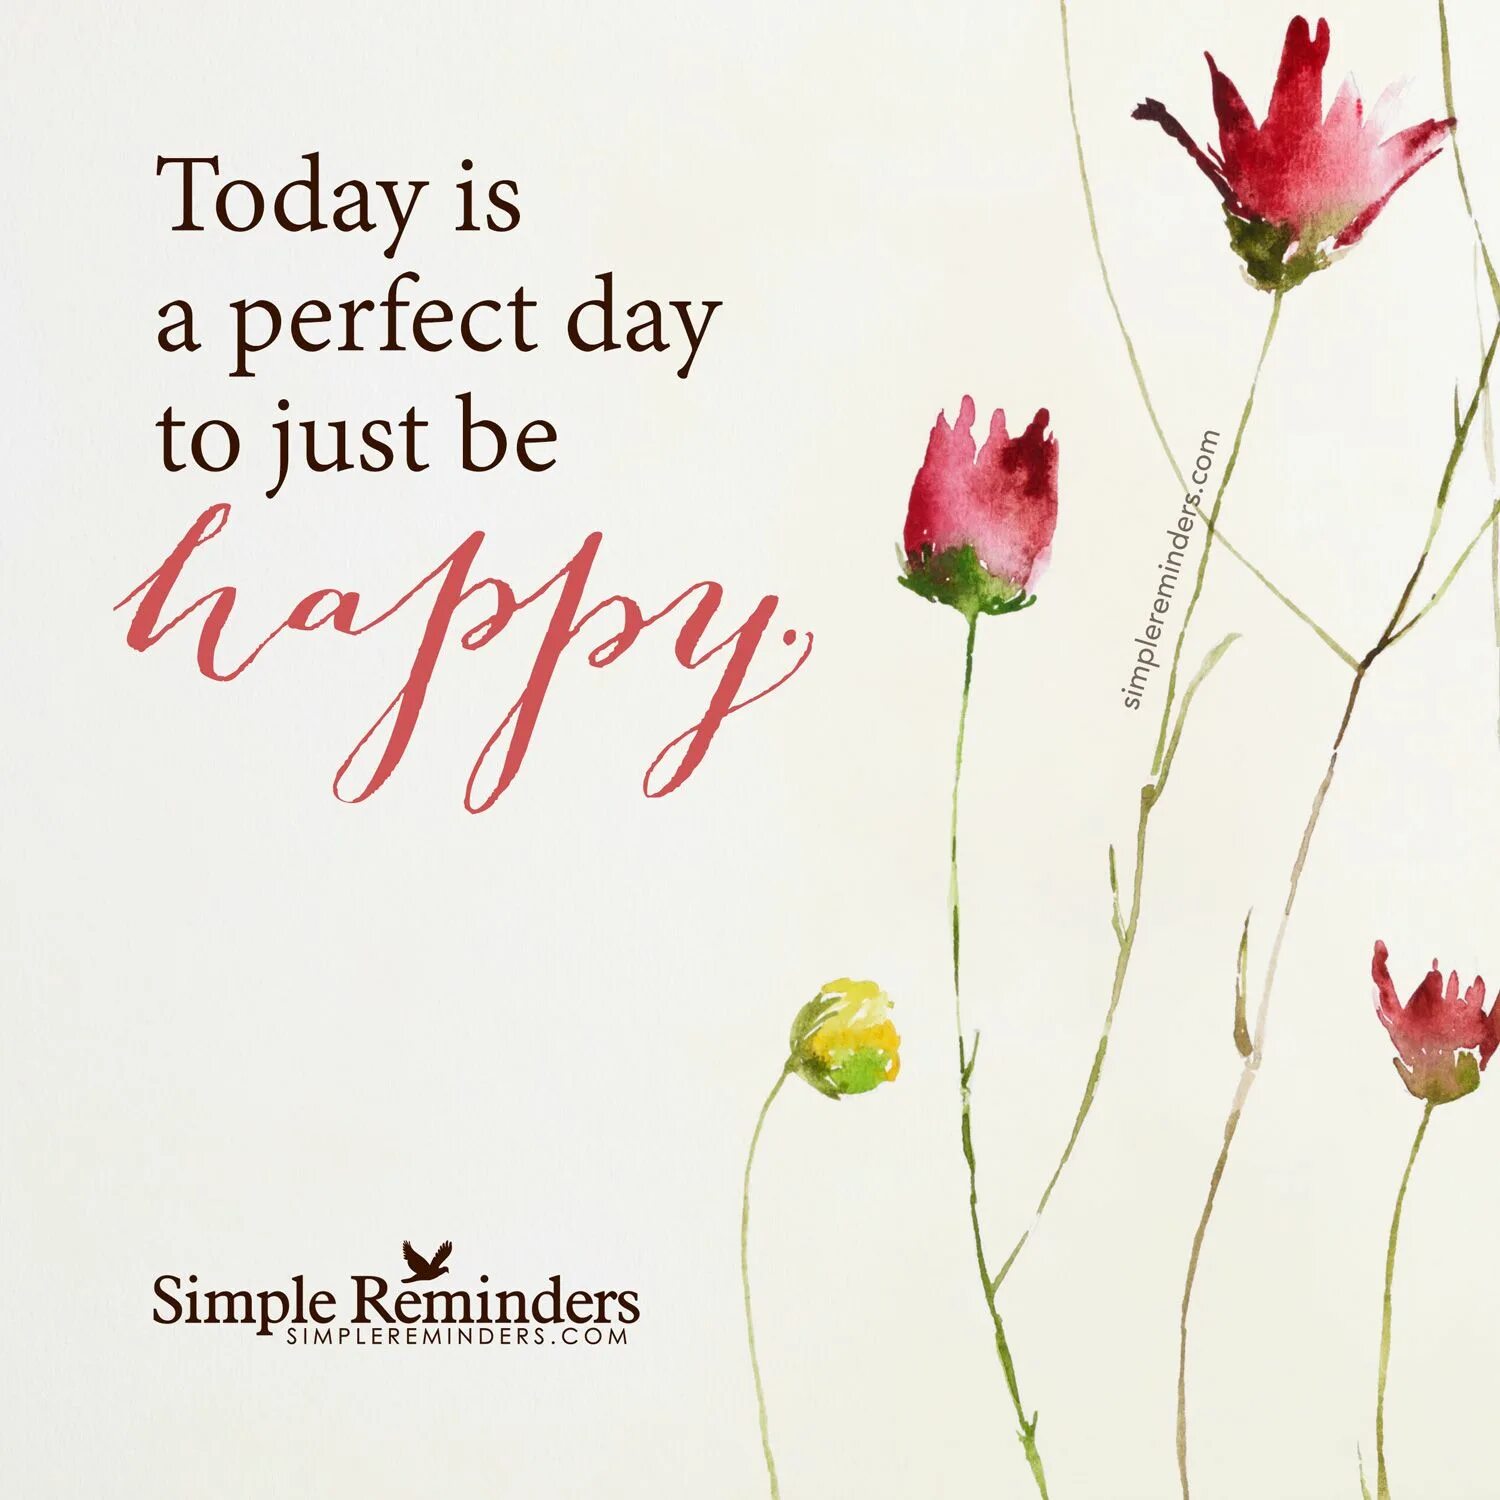 Today is the perfect Day to be Happy. I want you to be Happy Day. Today is a Happy Day картинки. Be Happy today.